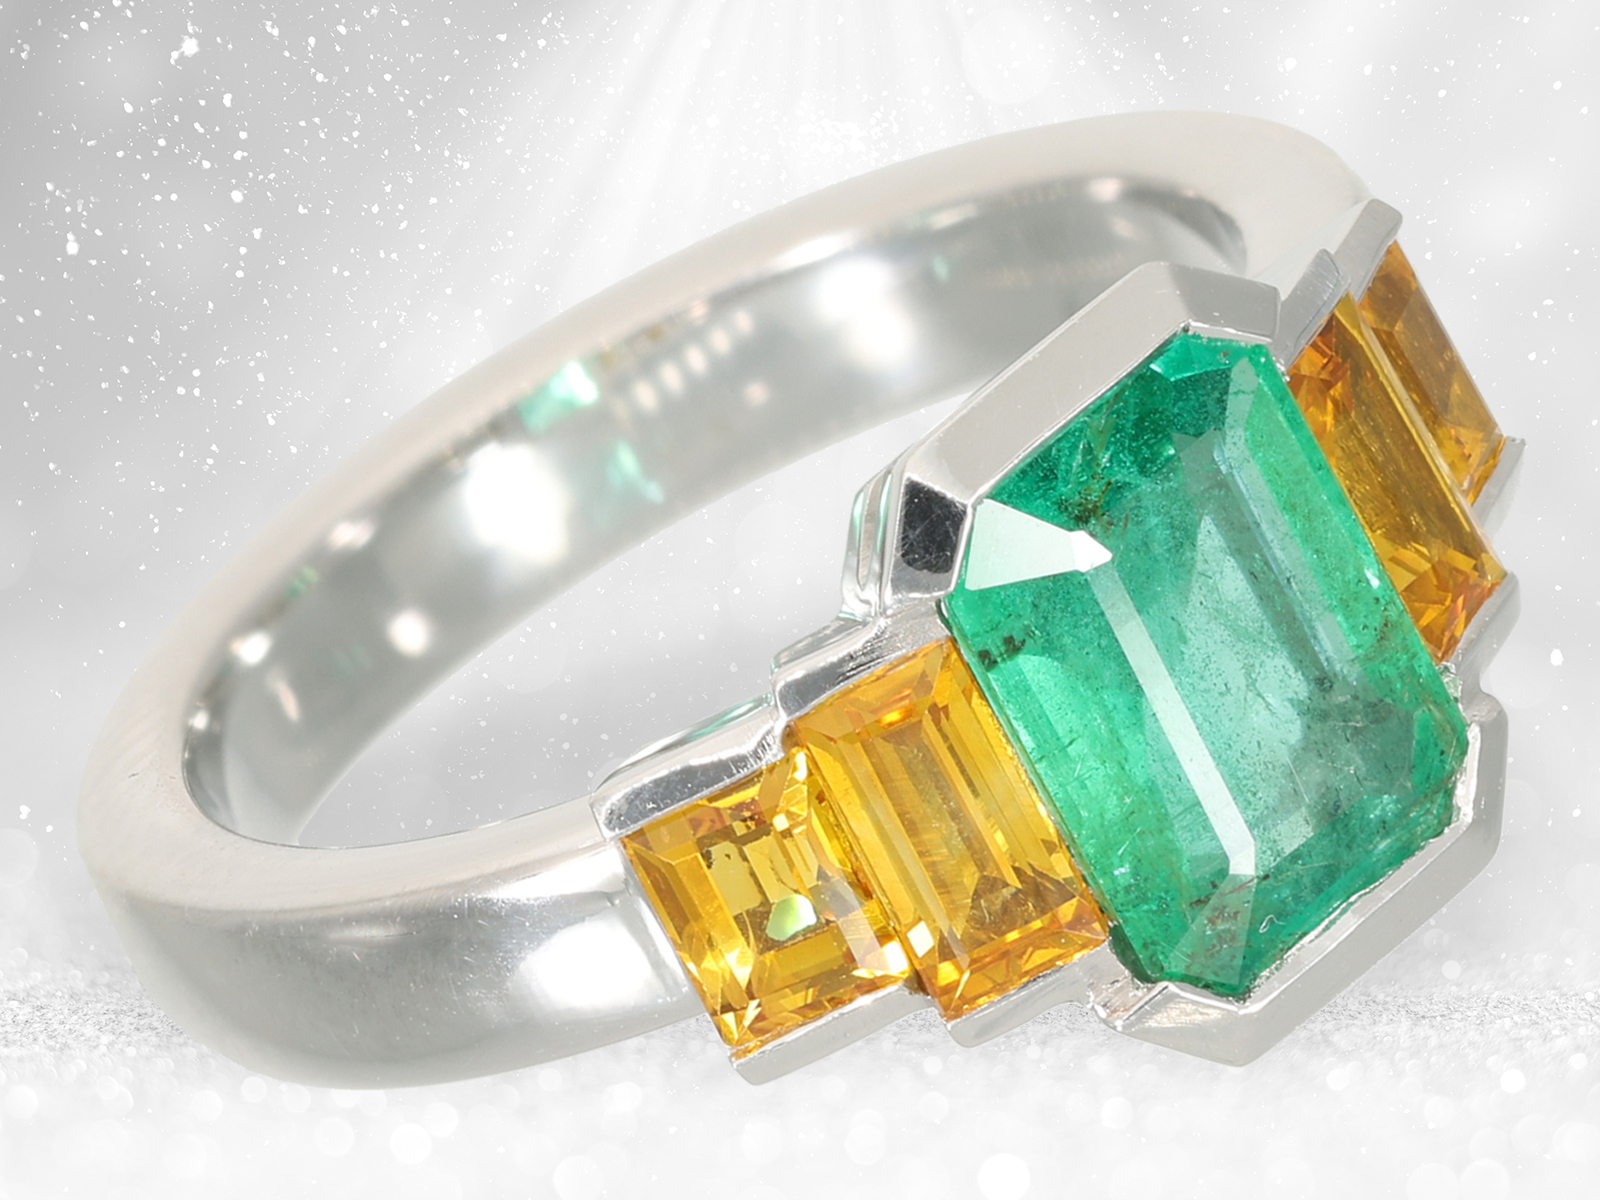 Ring: high quality goldsmith's work with emerald and sapphire set, handmade by Schupp manufactory - Image 3 of 4